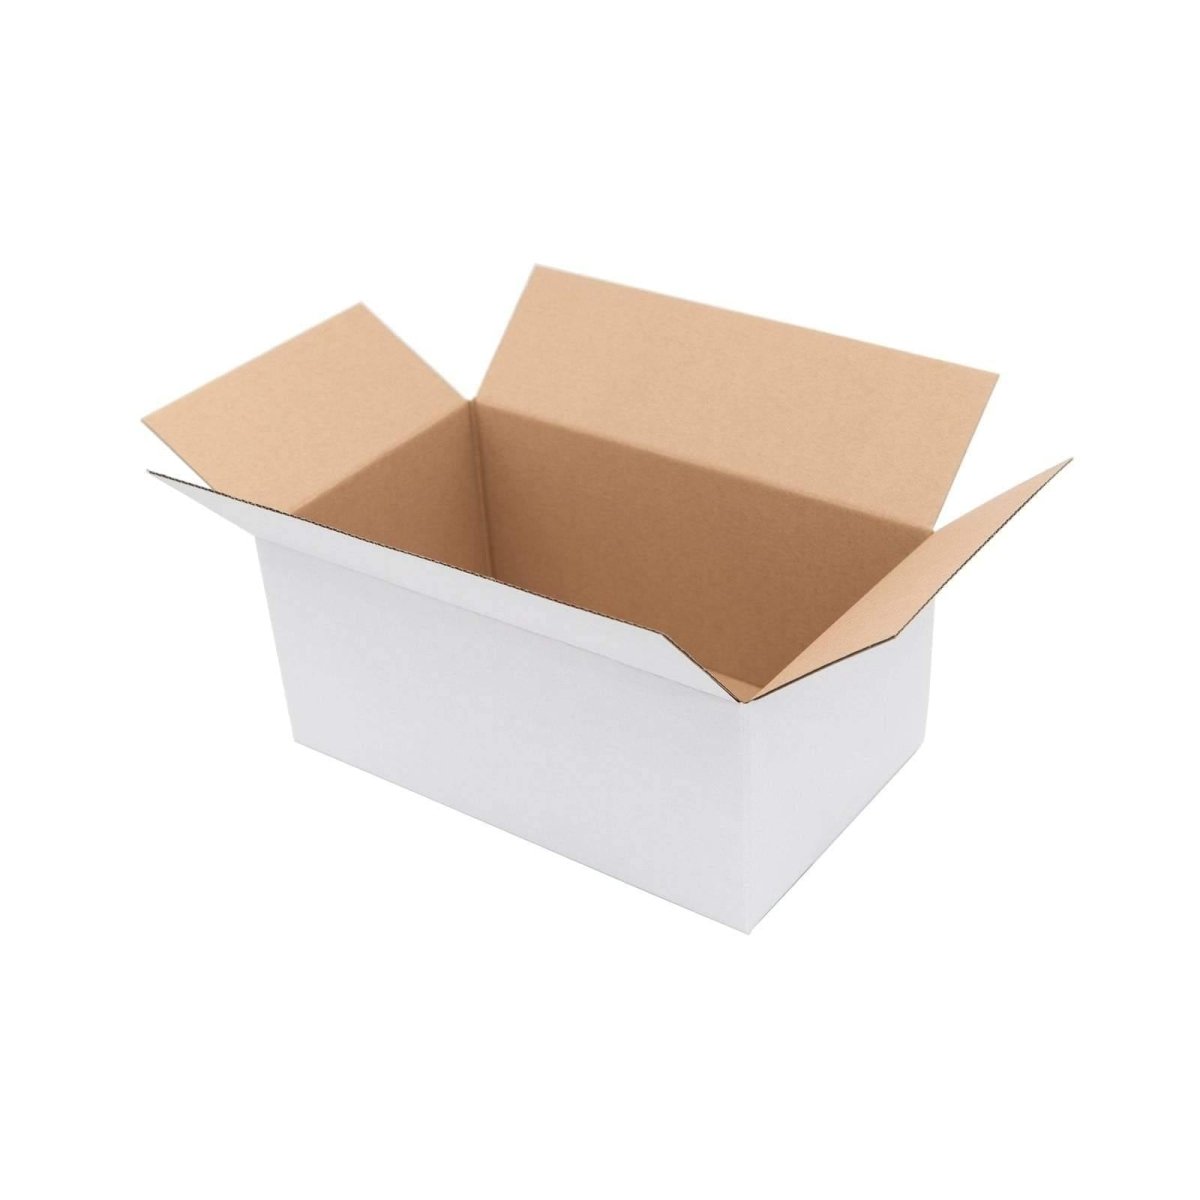 270x160x120mm Mailing Boxes & Cartons Collection - eBPak